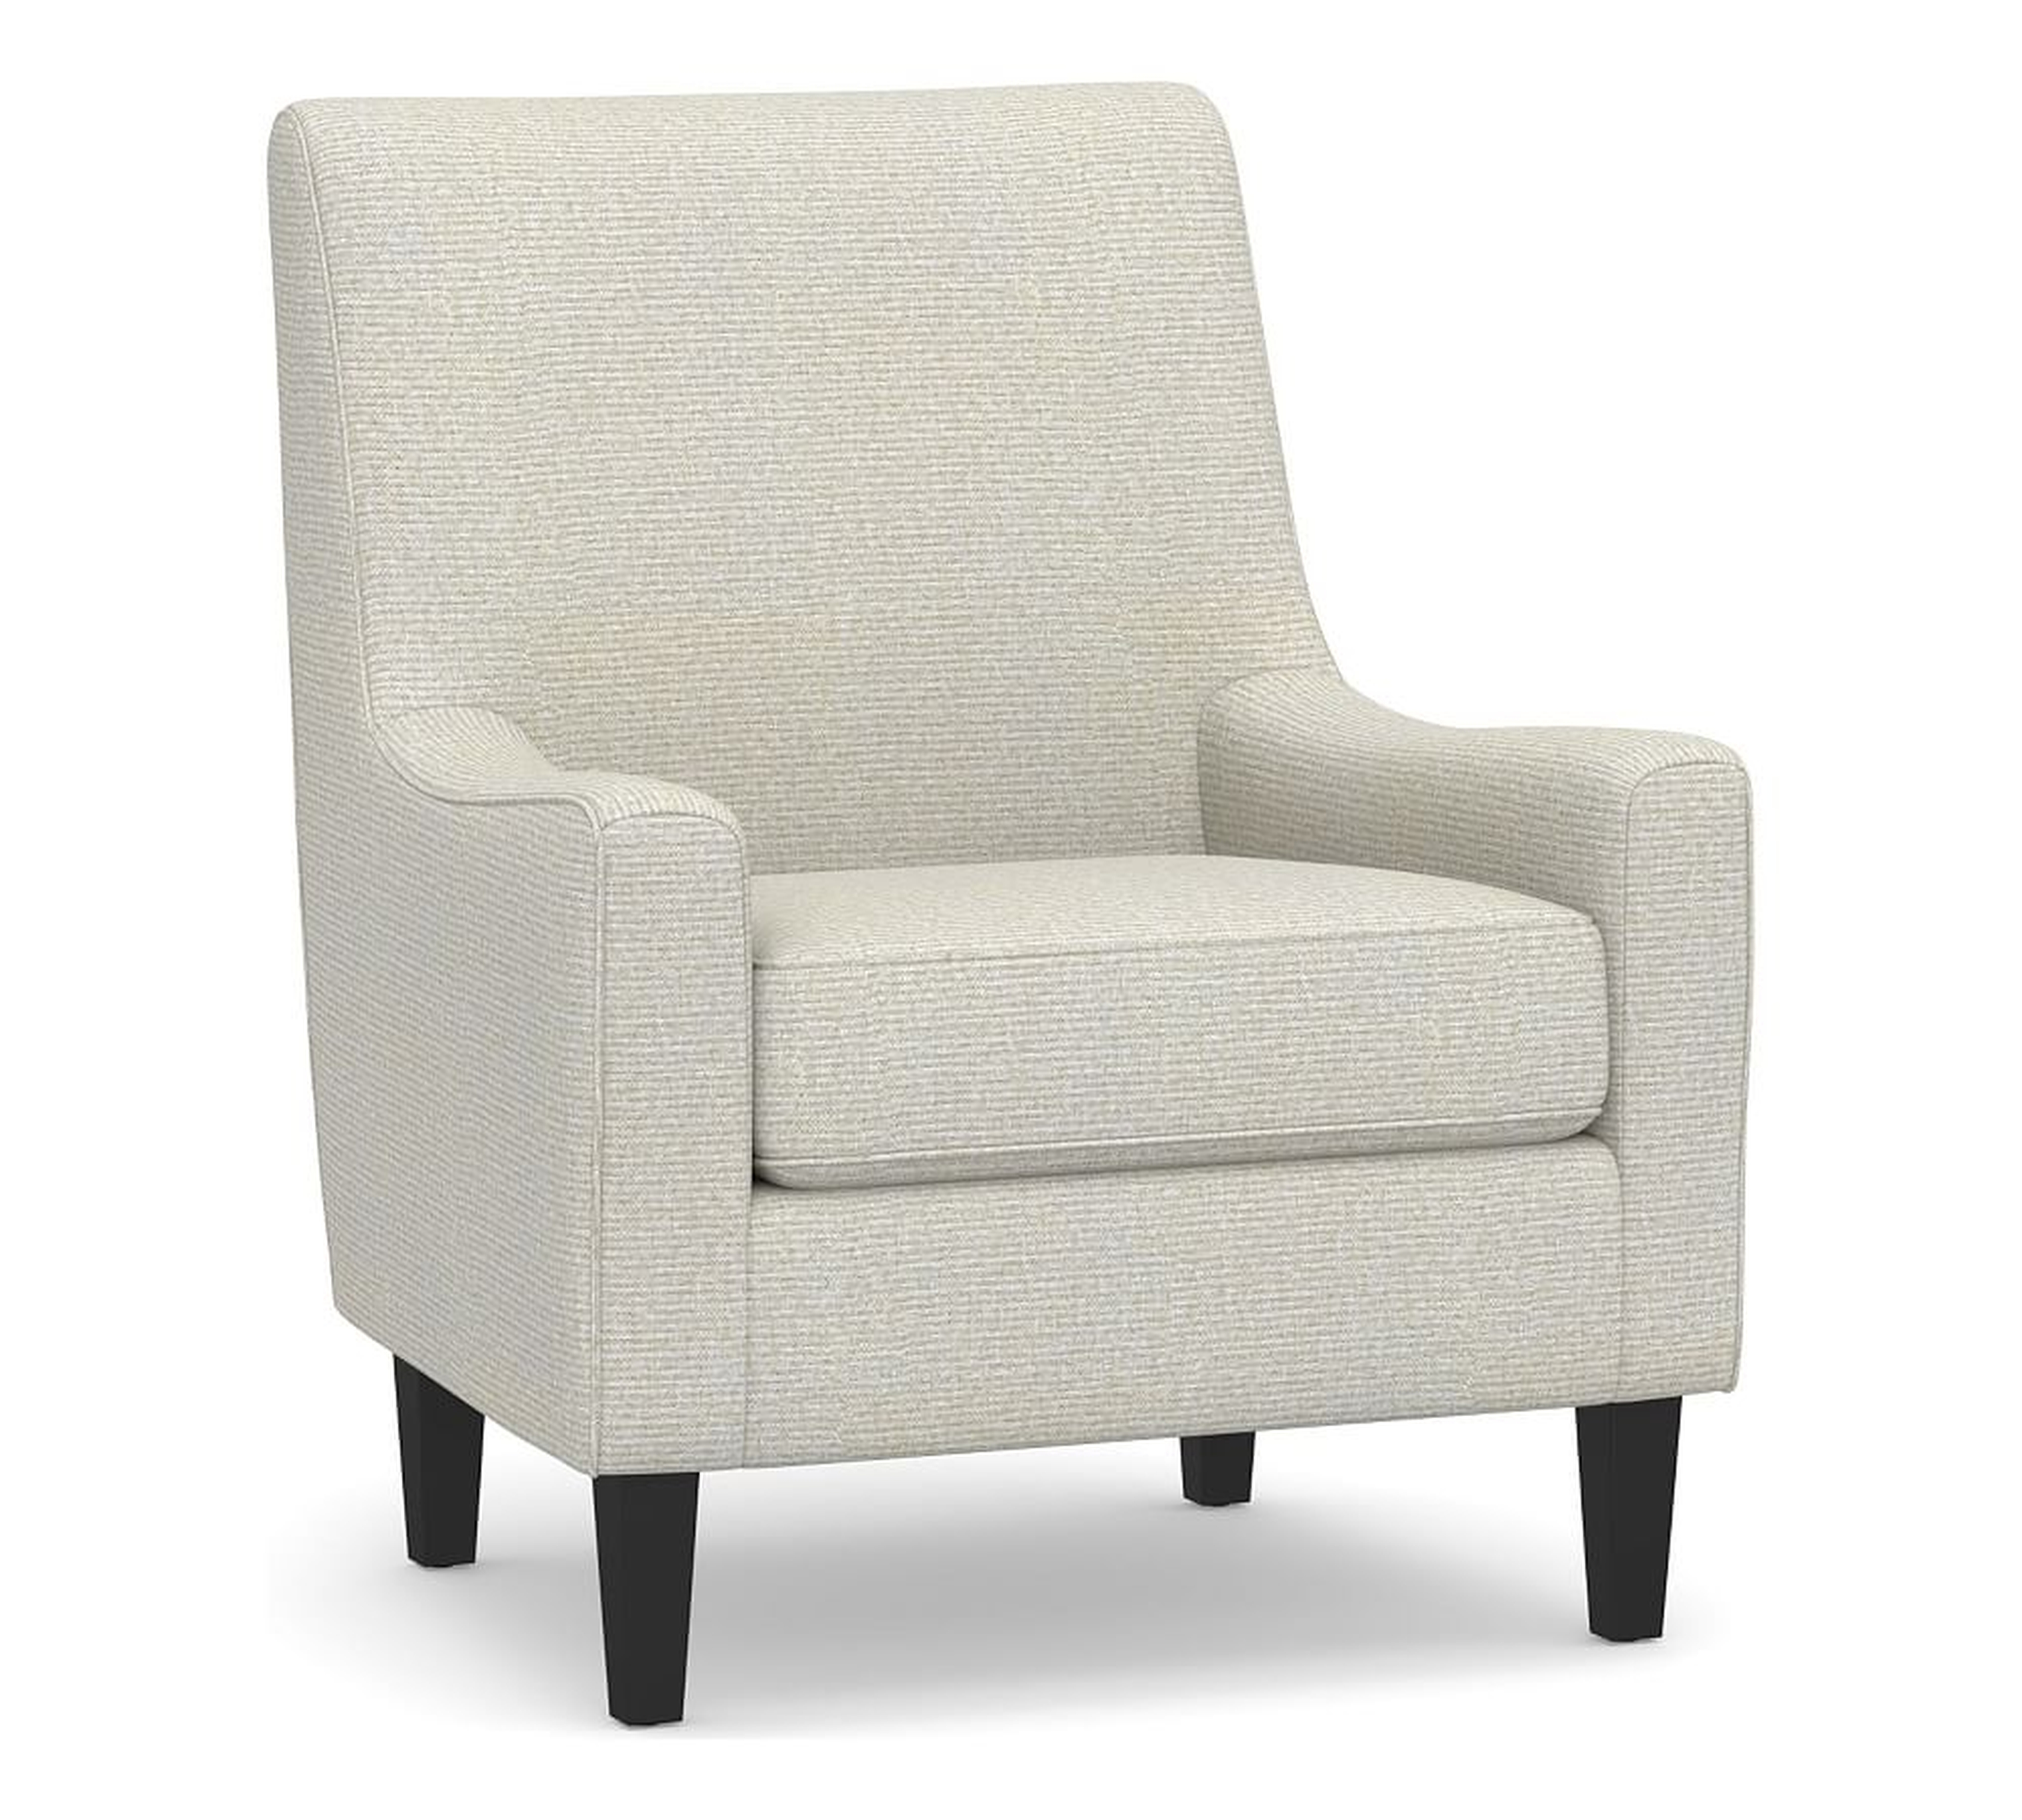 SoMa Isaac Upholstered Armchair, Polyester Wrapped Cushions, Performance Heathered Basketweave Dove - Pottery Barn